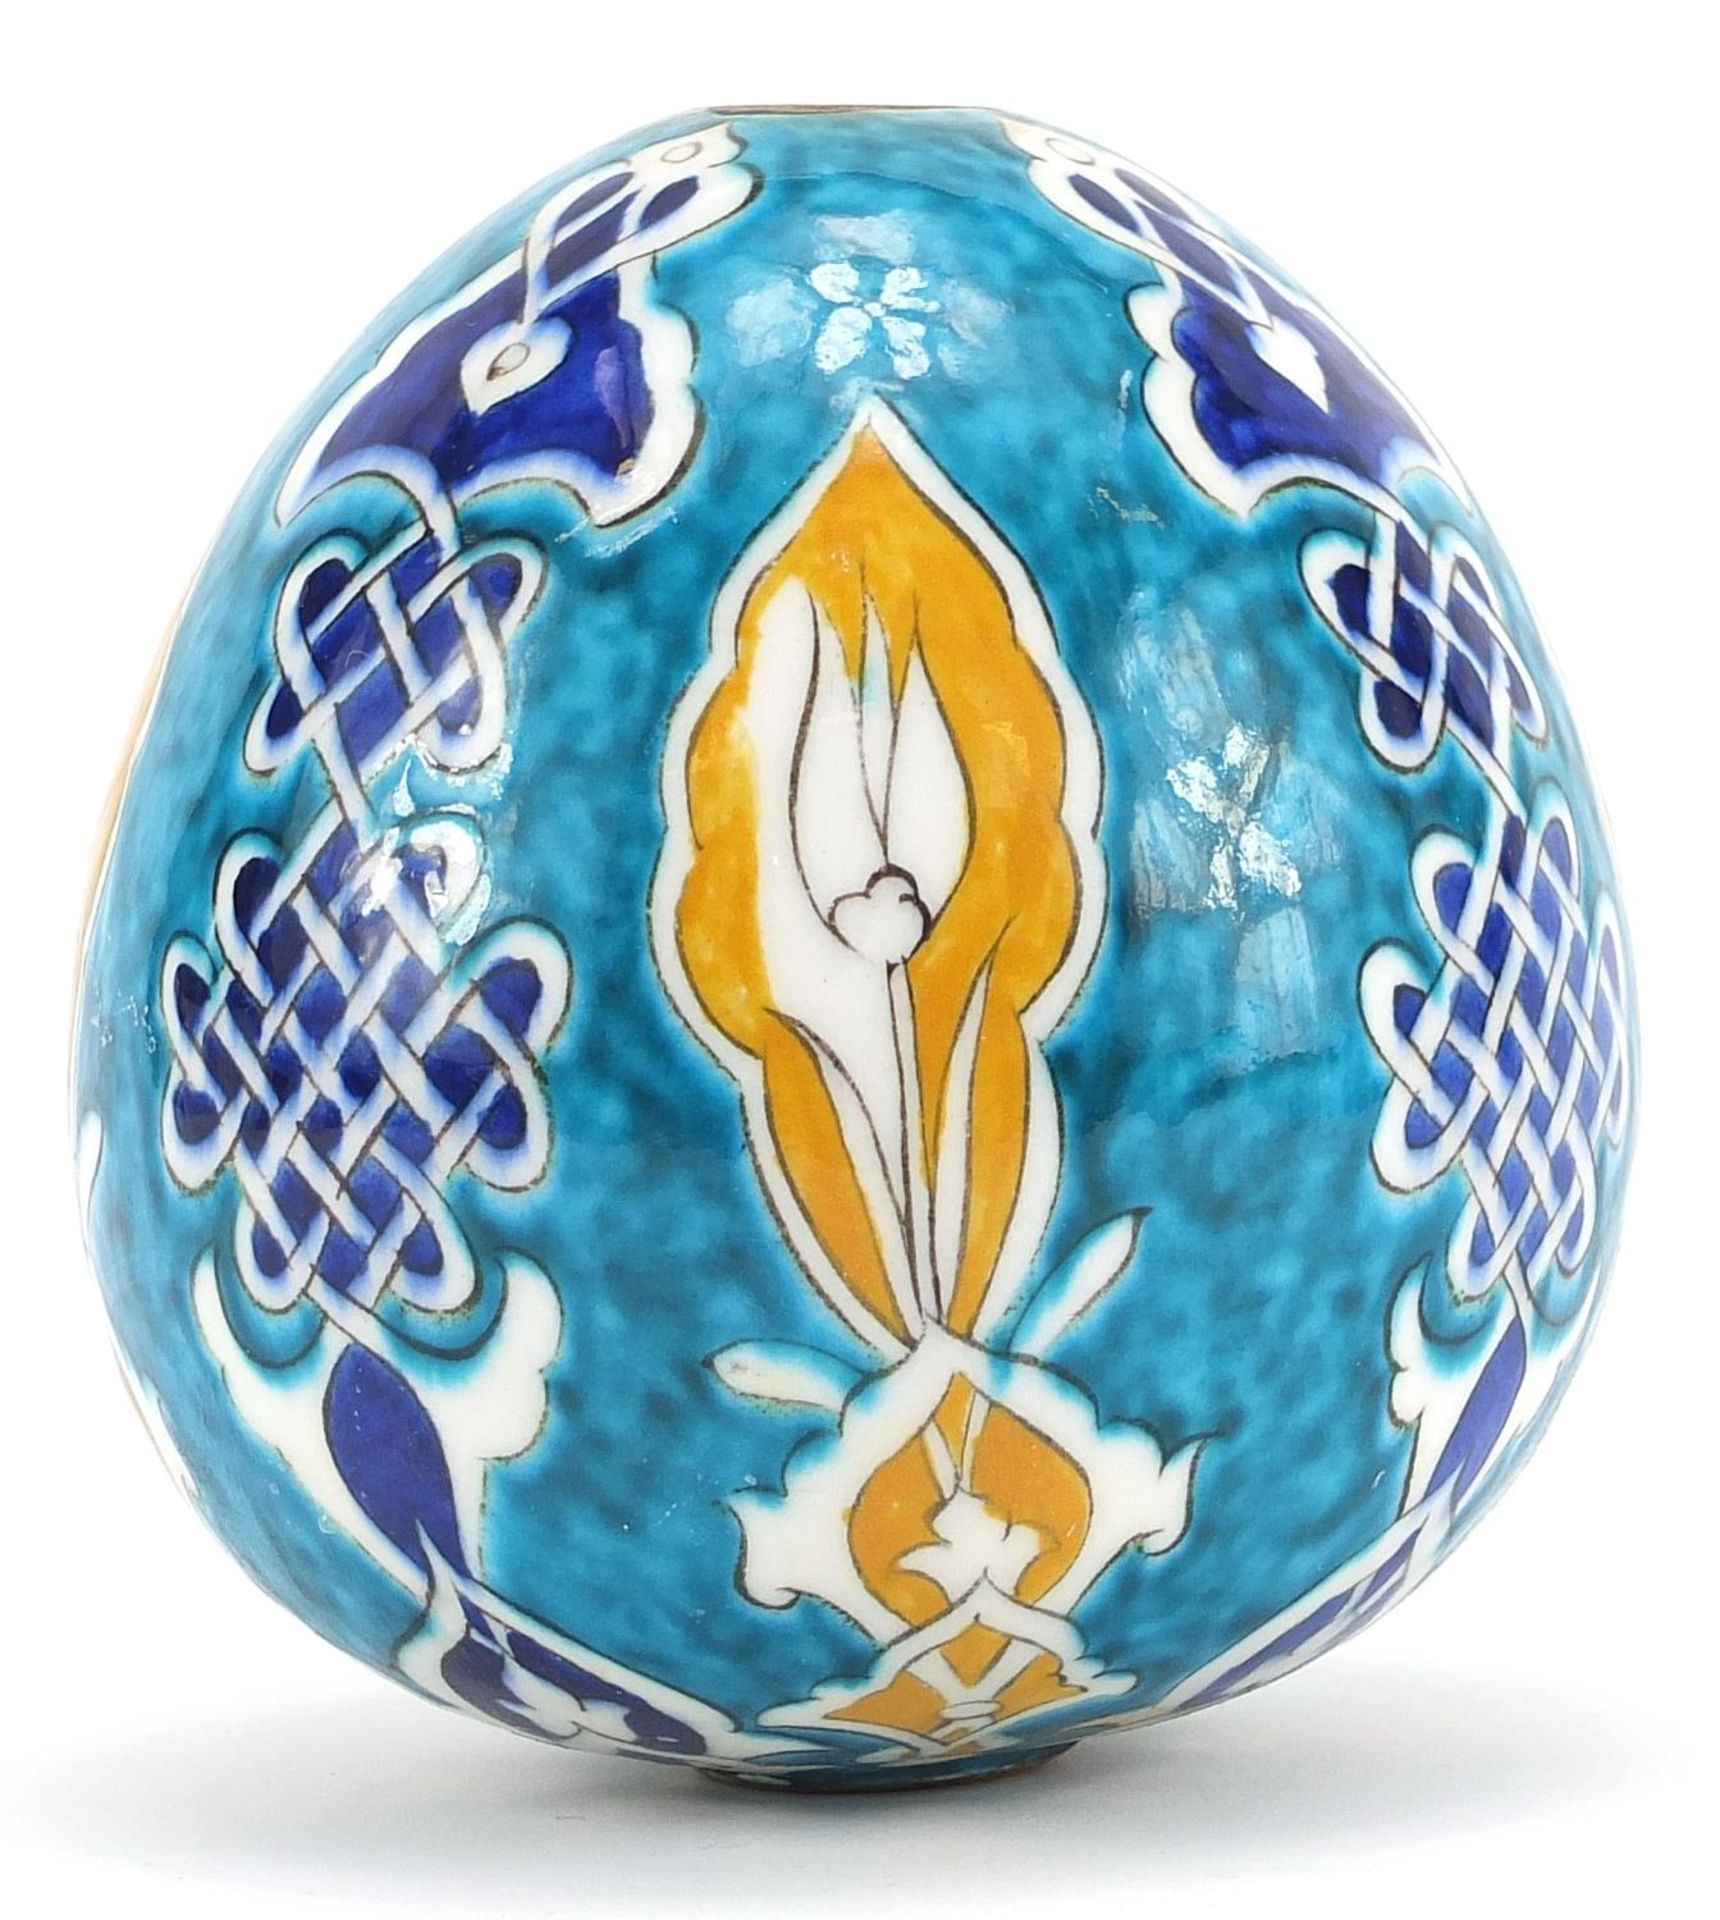 Turkish Iznik pottery hanging ball hand painted with flowers, 12.5cm high - Image 2 of 3